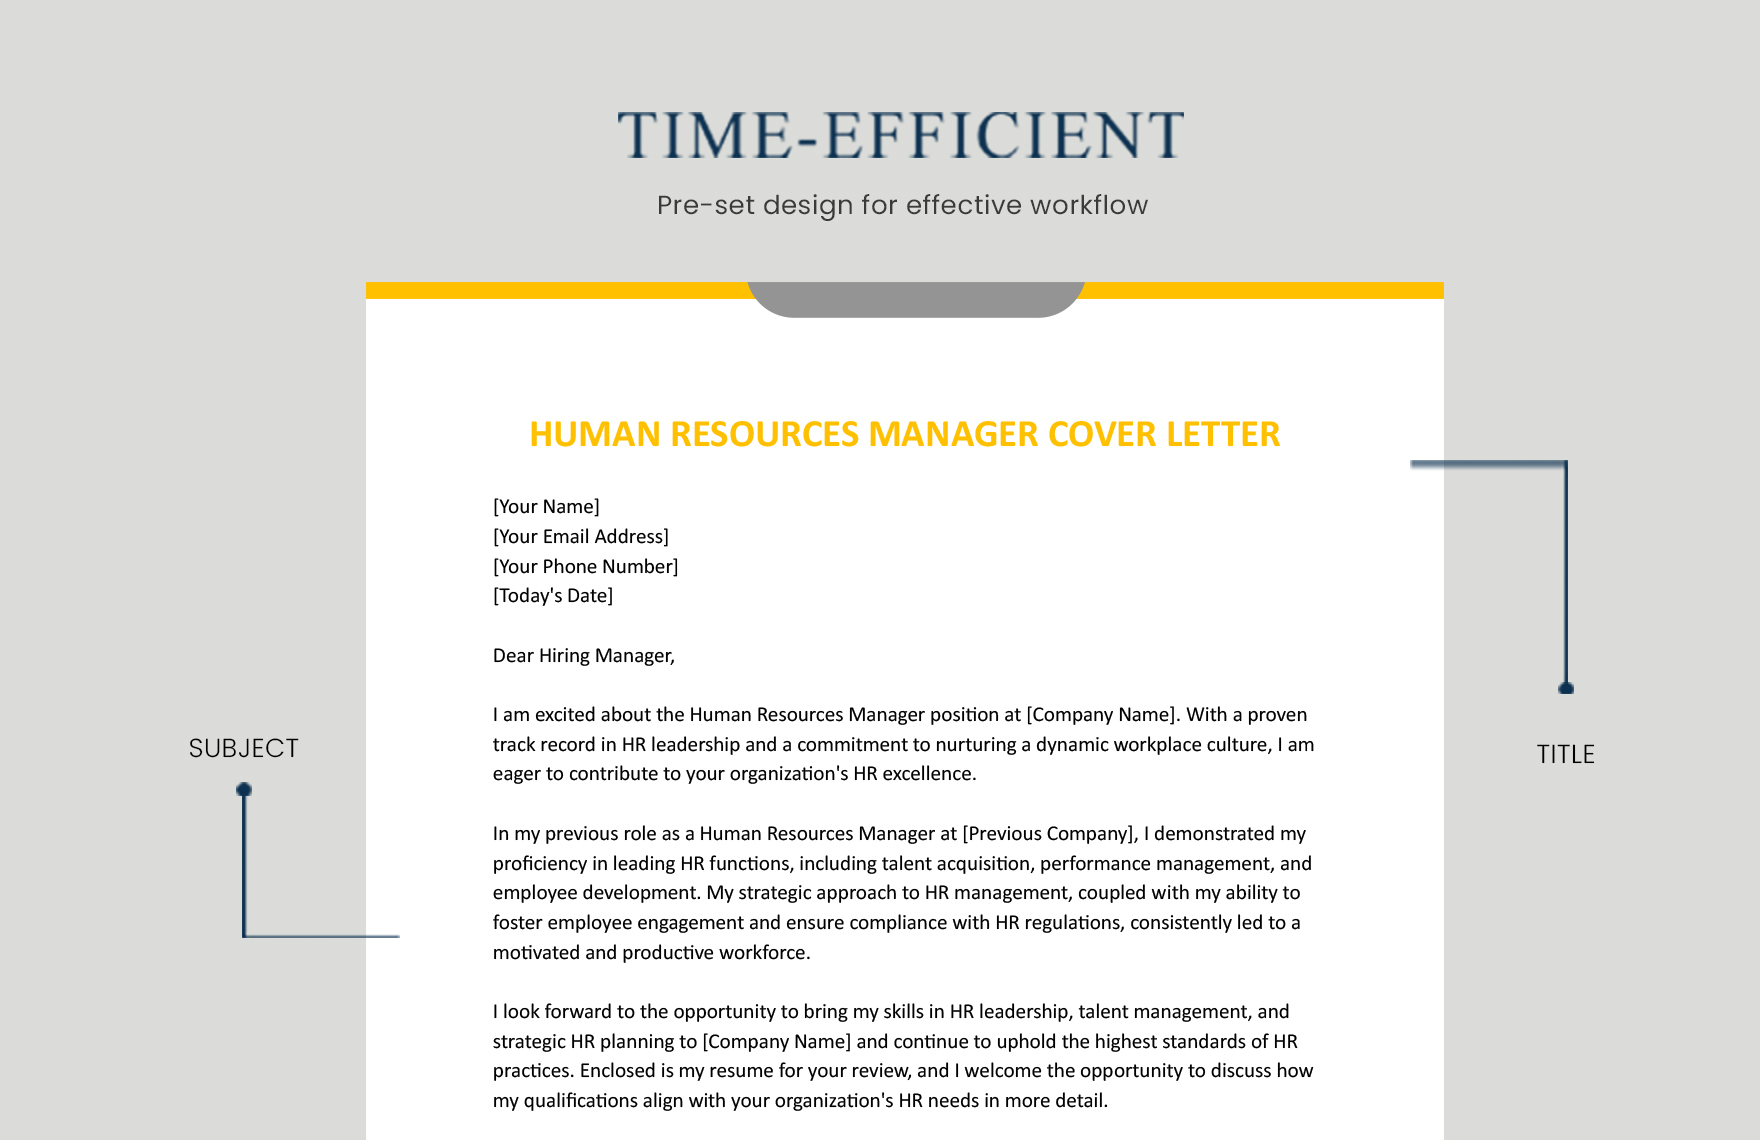 Human Resources Manager Cover Letter